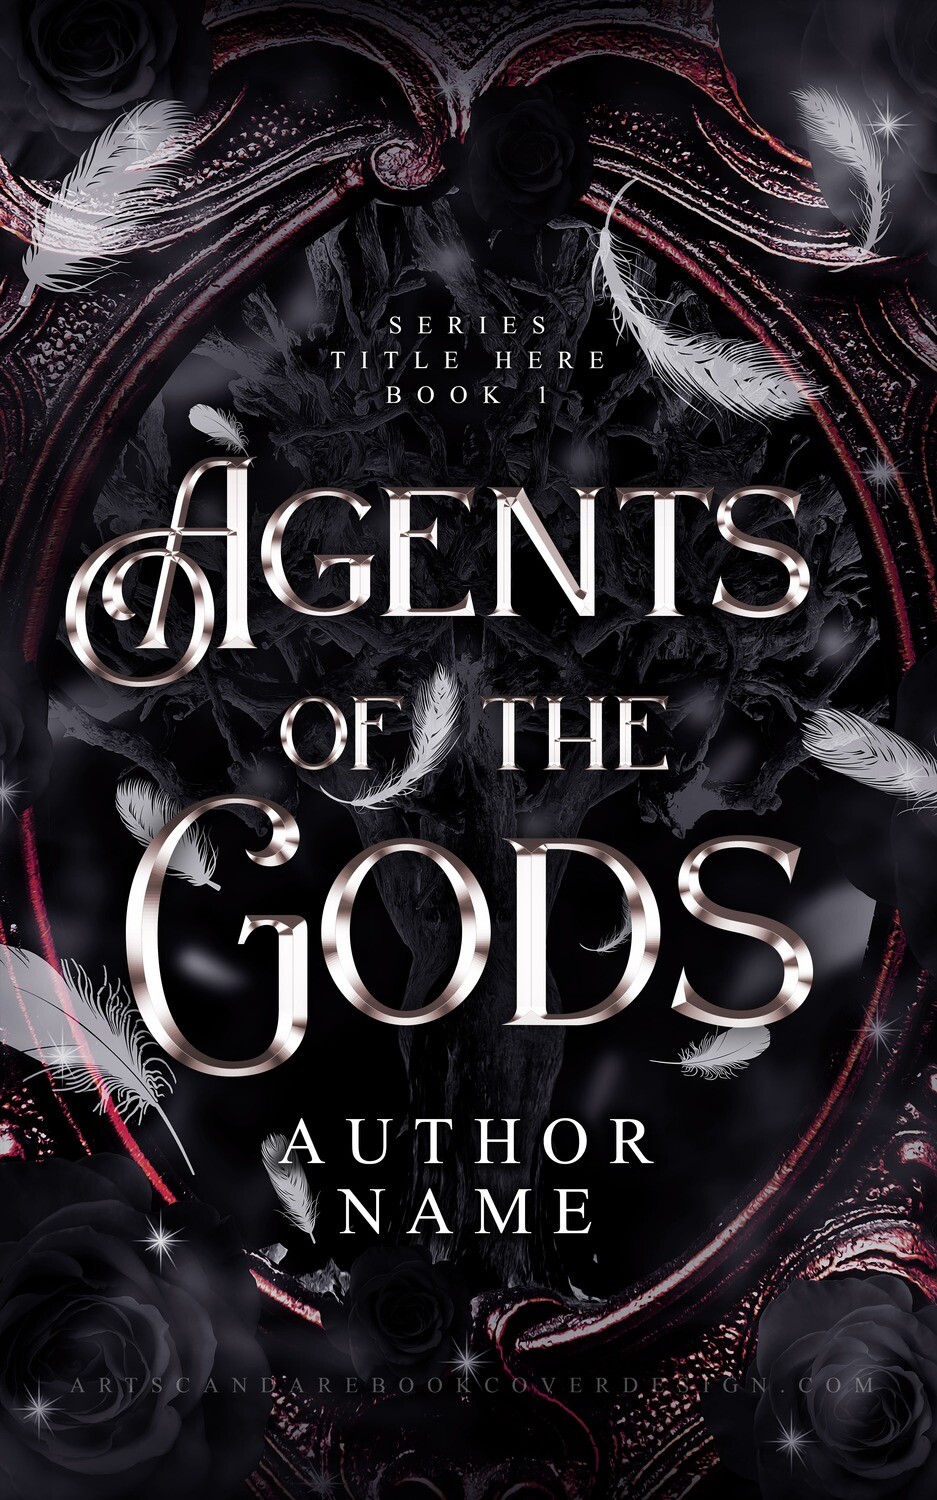 AGENTS OF THE GODS